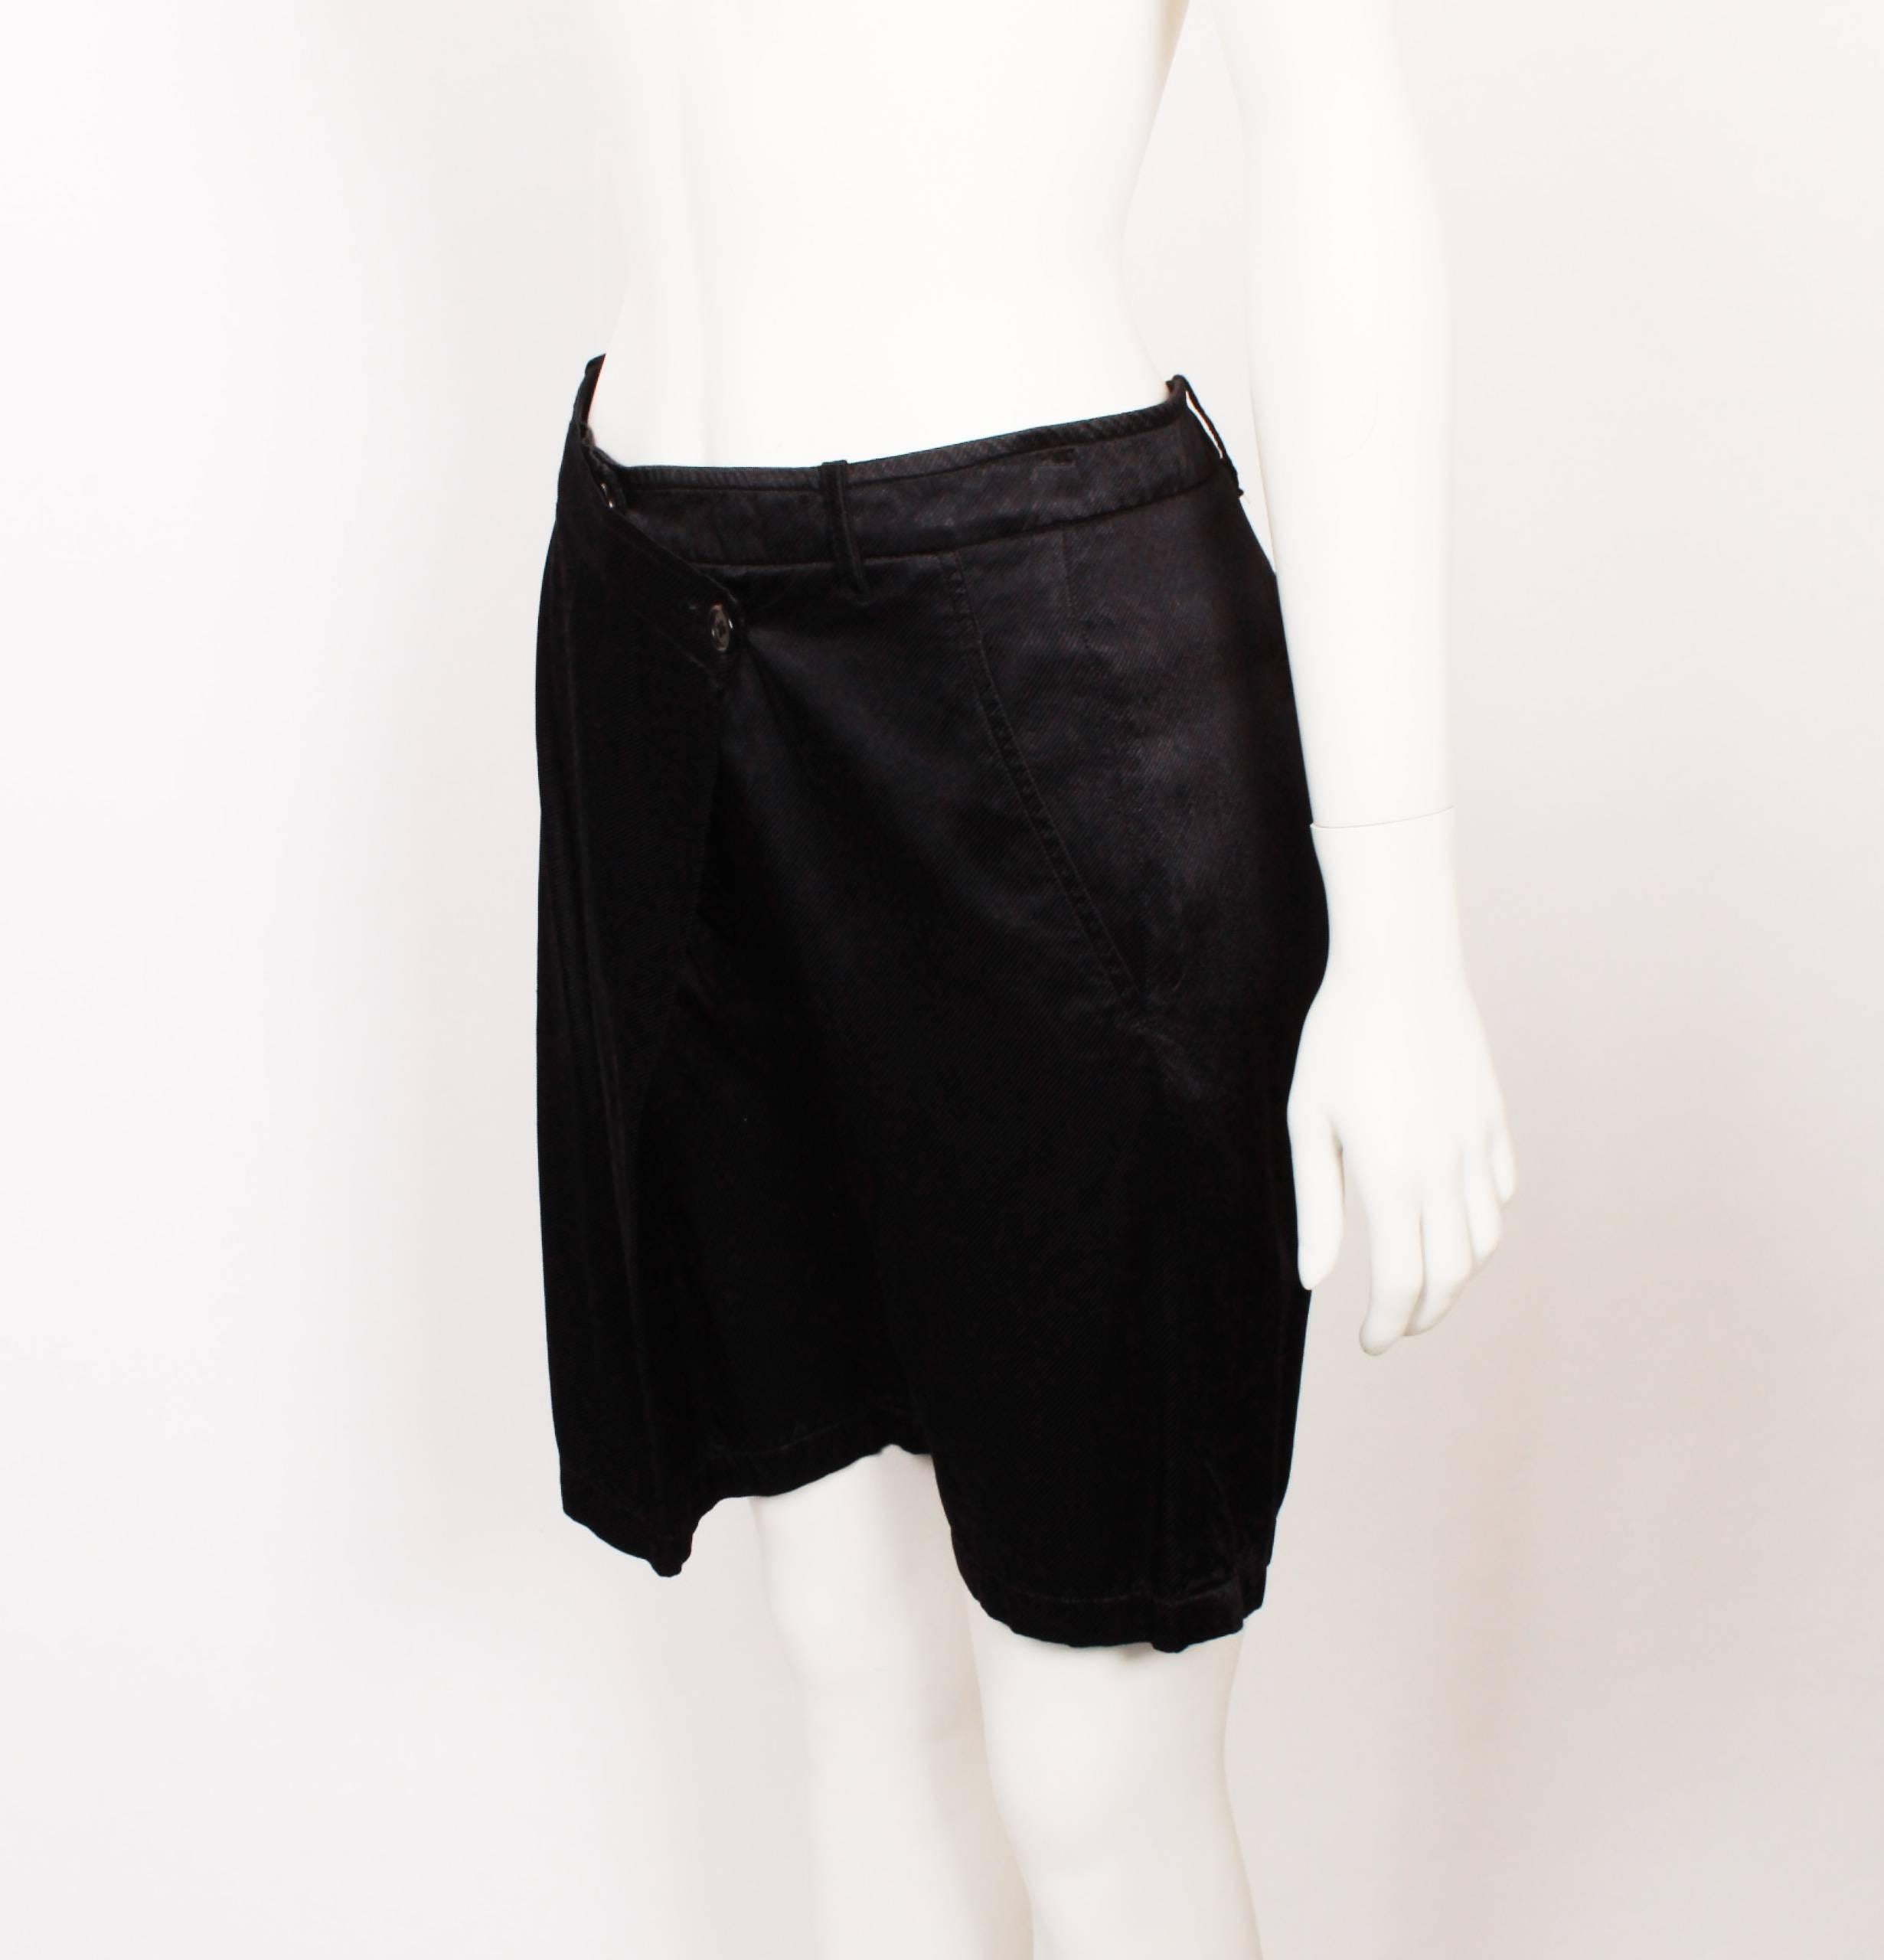 Double Layered Wrap SHorts

Ann Demeulemeester incorporates somber, moody hues juxtaposed with more vibrant tones in the collections. Reflecting the label's artistic sensibility,  slick-cut asymmetric accents and pieces with offbeat embellishments